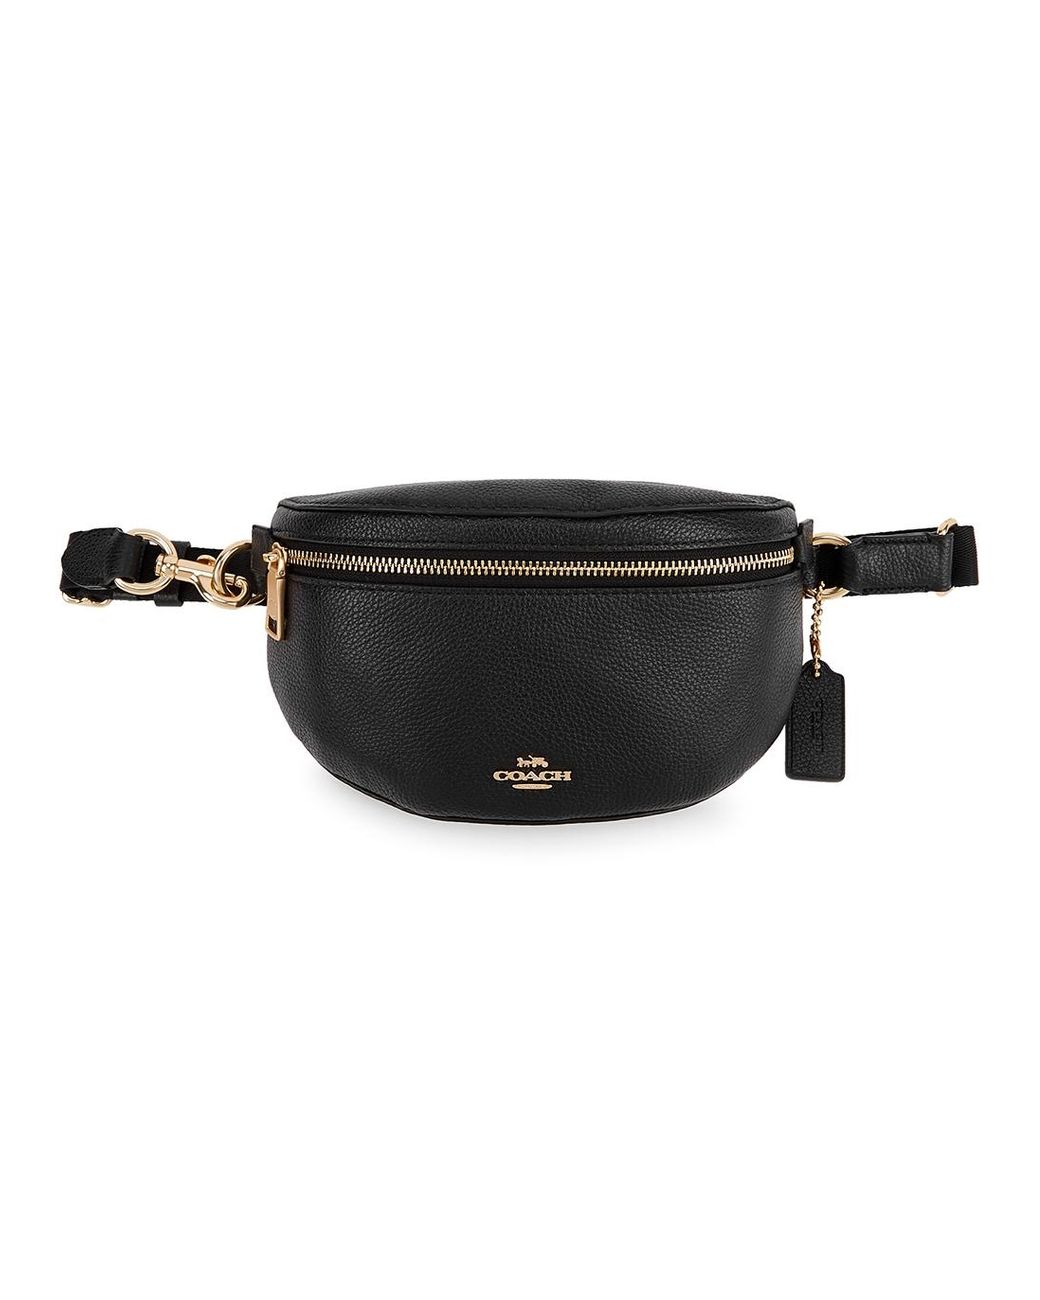 COACH Bethany Leather Belt Bag in Black | Lyst